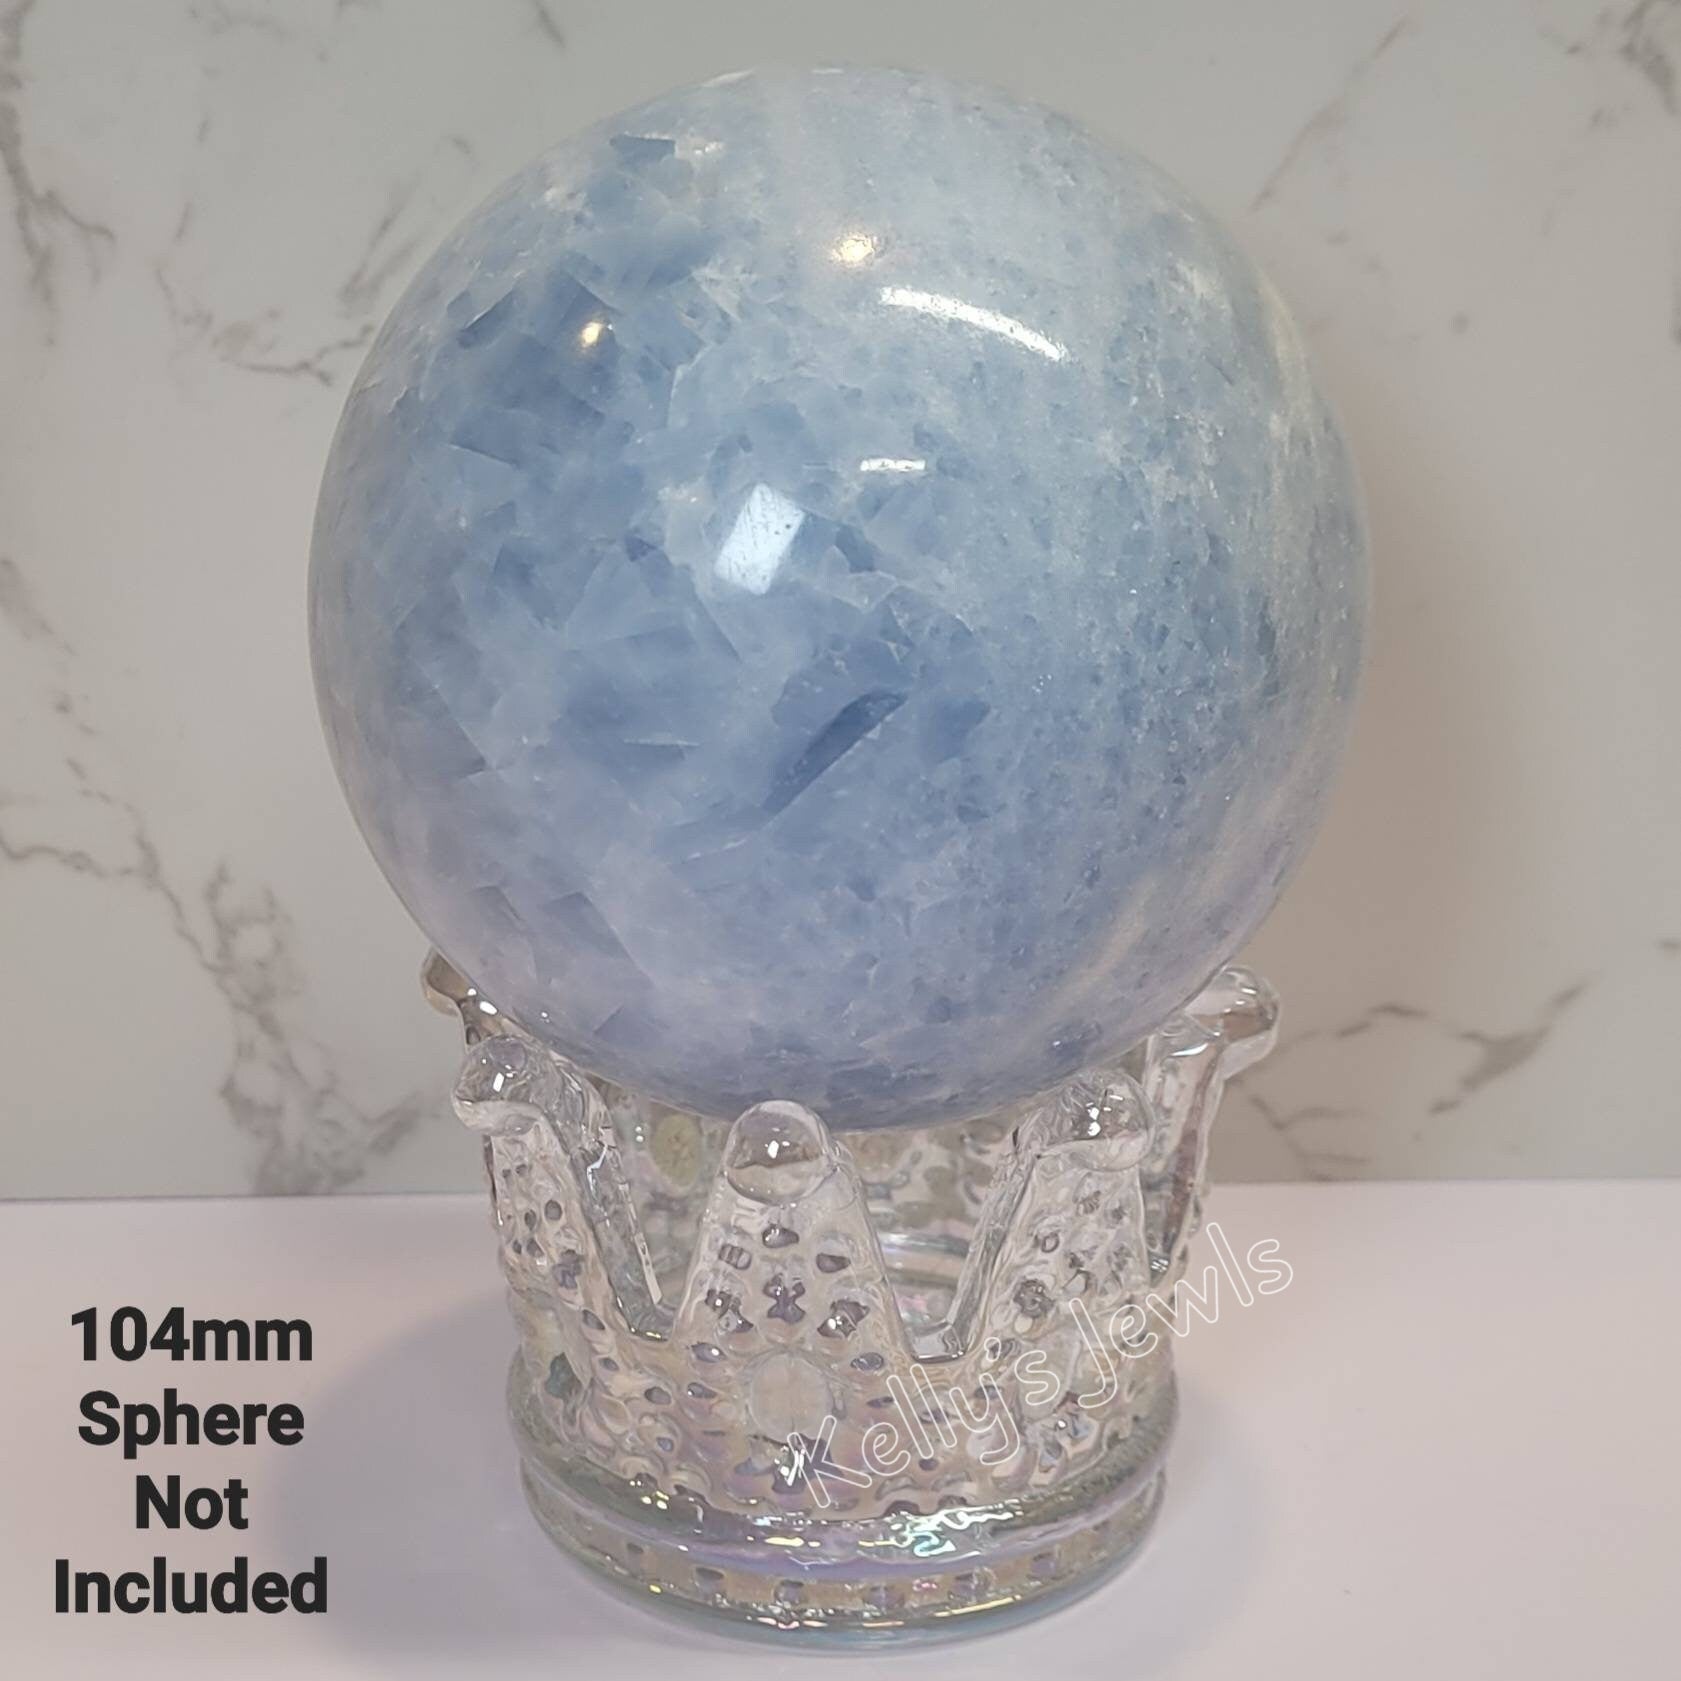 Angel Aura Glass Crown Sphere Display Stand for Spheres, Balls or Eggs 2.4" to 8" (61mm to 205mm)